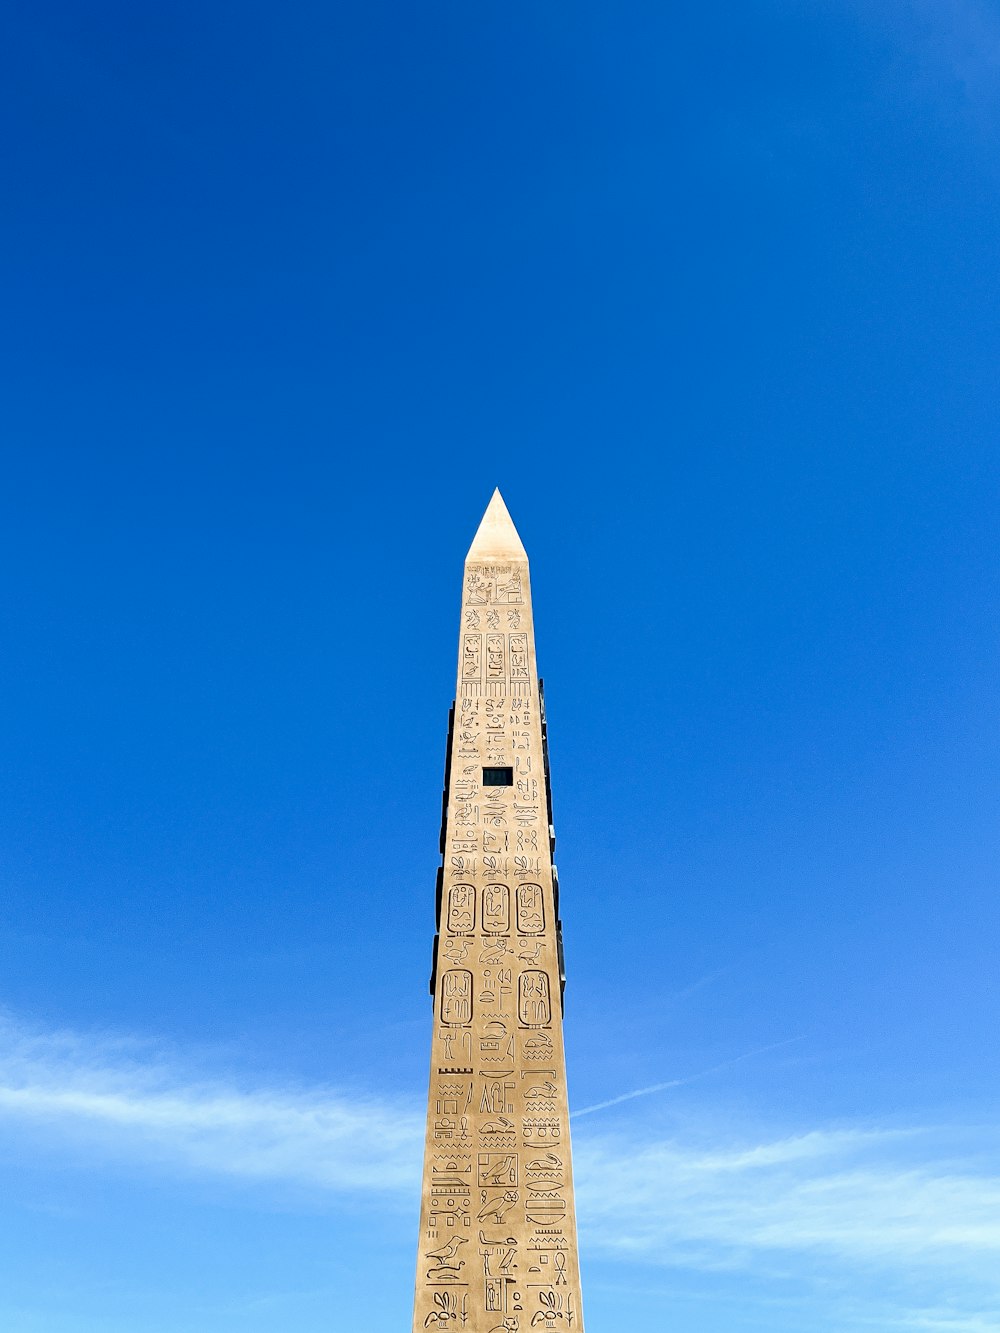 a tall obelisk with writing on it against a blue sky